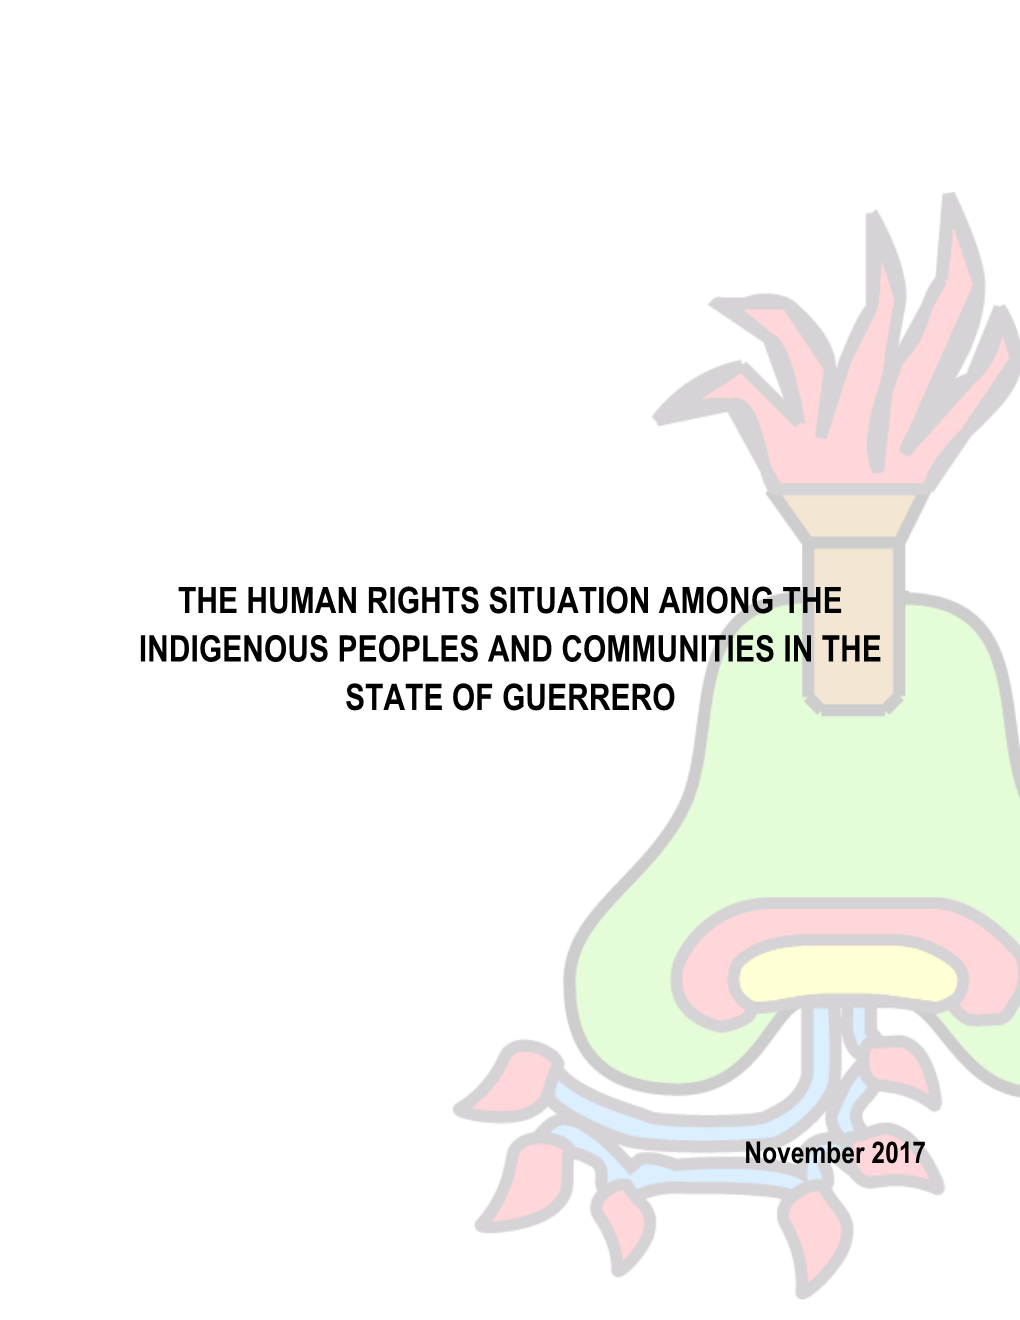 The Human Rights Situation Among the Indigenous Peoples and Communities in the State of Guerrero